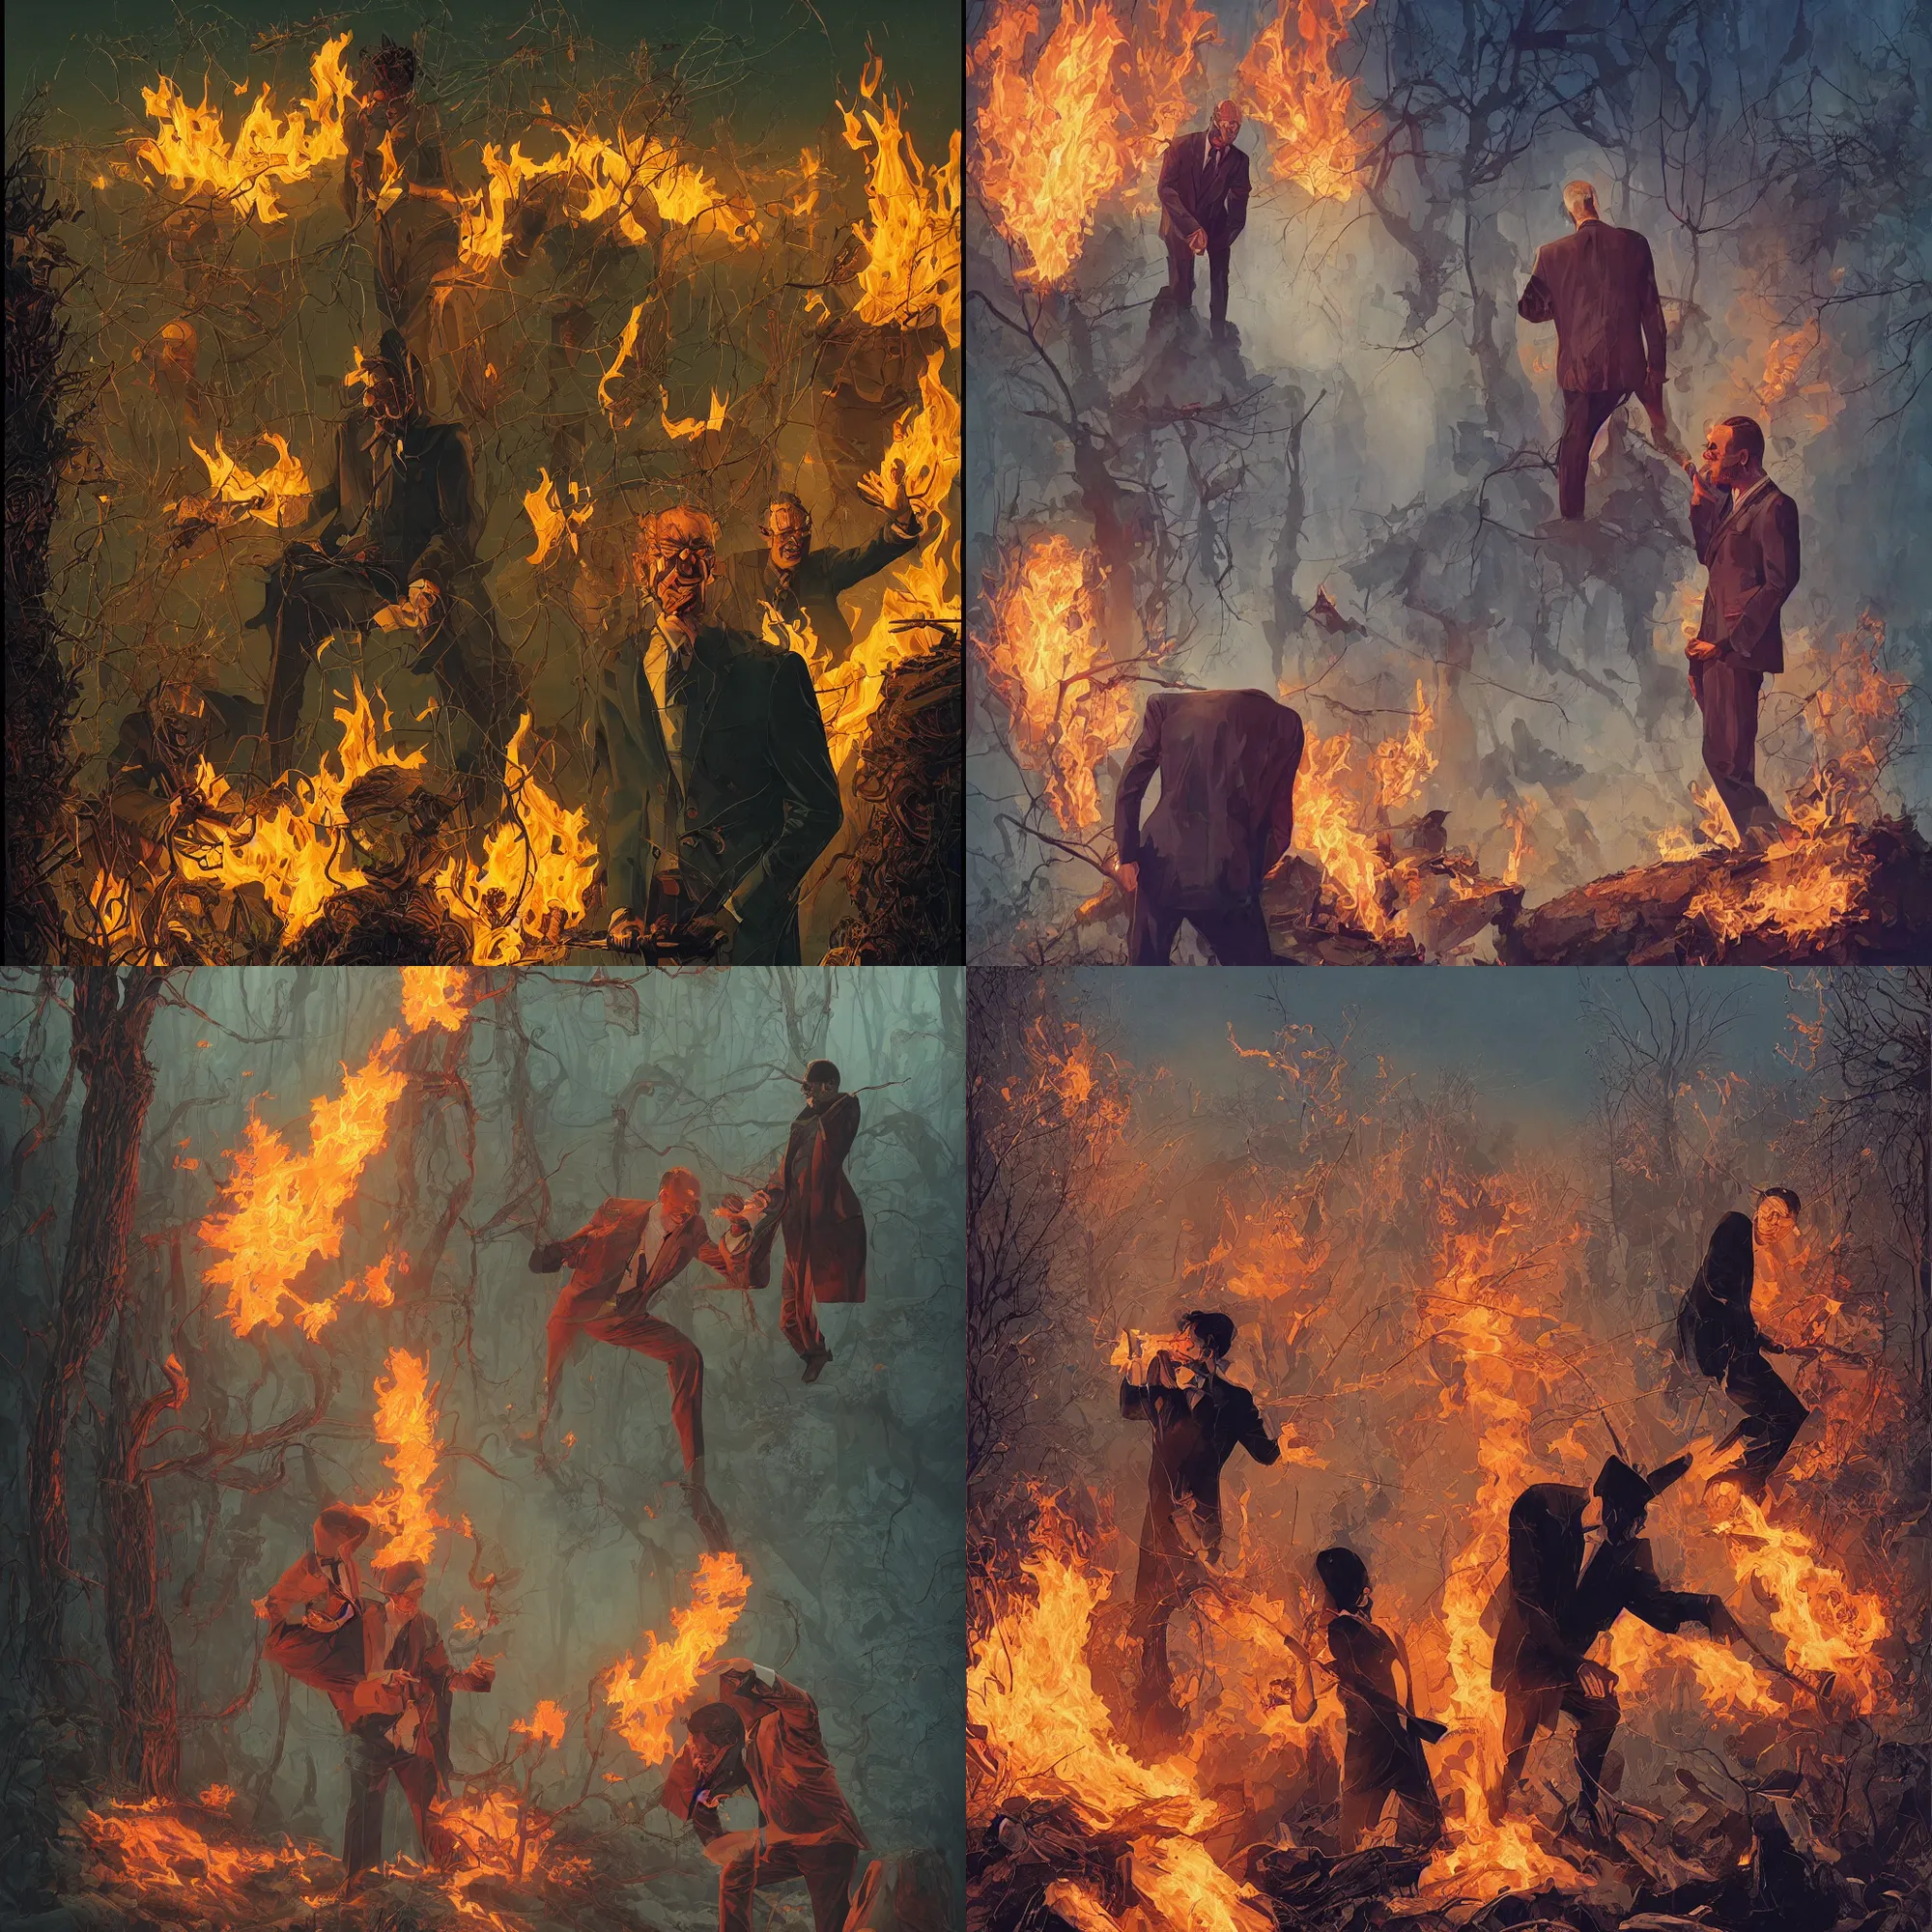 Prompt: poster artwork by Michael Whelan and Tomer Hanuka, Karol Bak of evil ambitius man in suit setting fire to the wild nature near a river, enjoying the destruction for money, clean, simple illustration, nostalgic, domestic, full of details